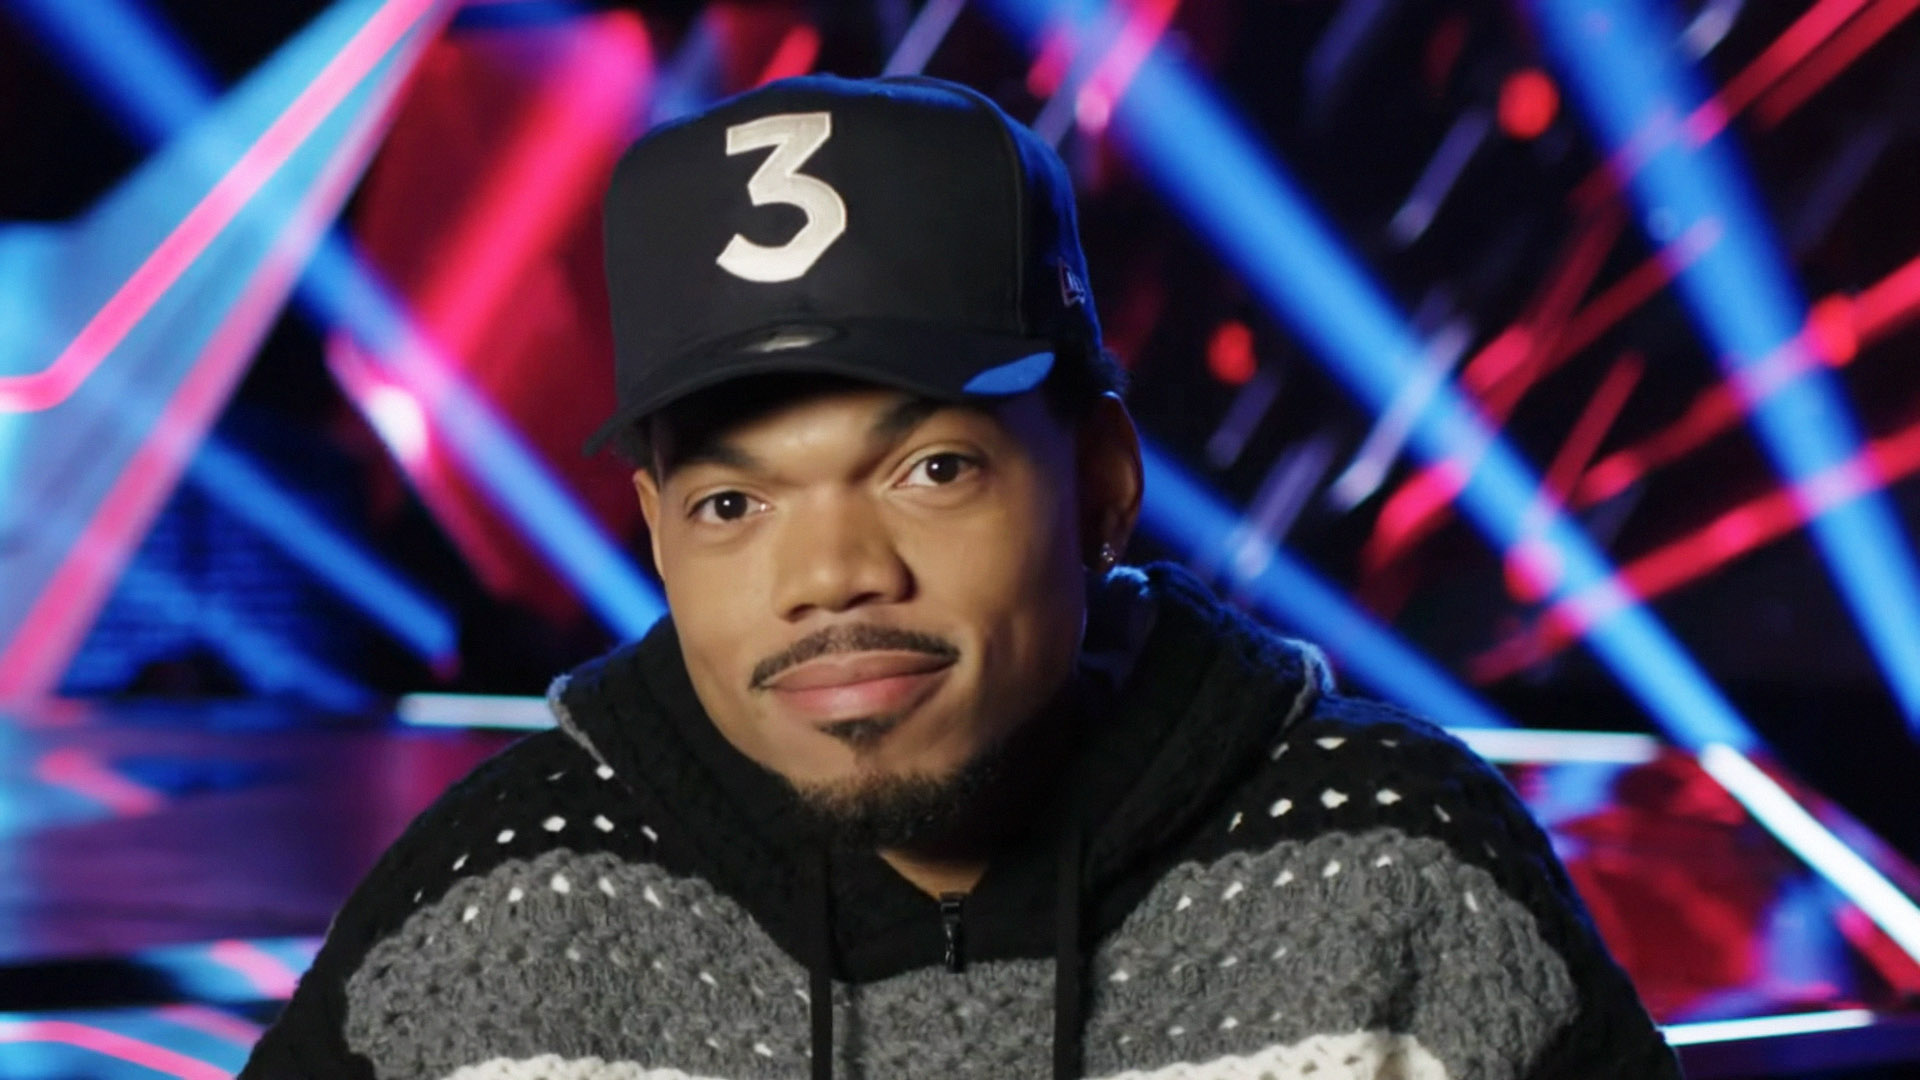 Chance the Rapper Lost His Shot on Actually Winning The Voice After Playoff Choices